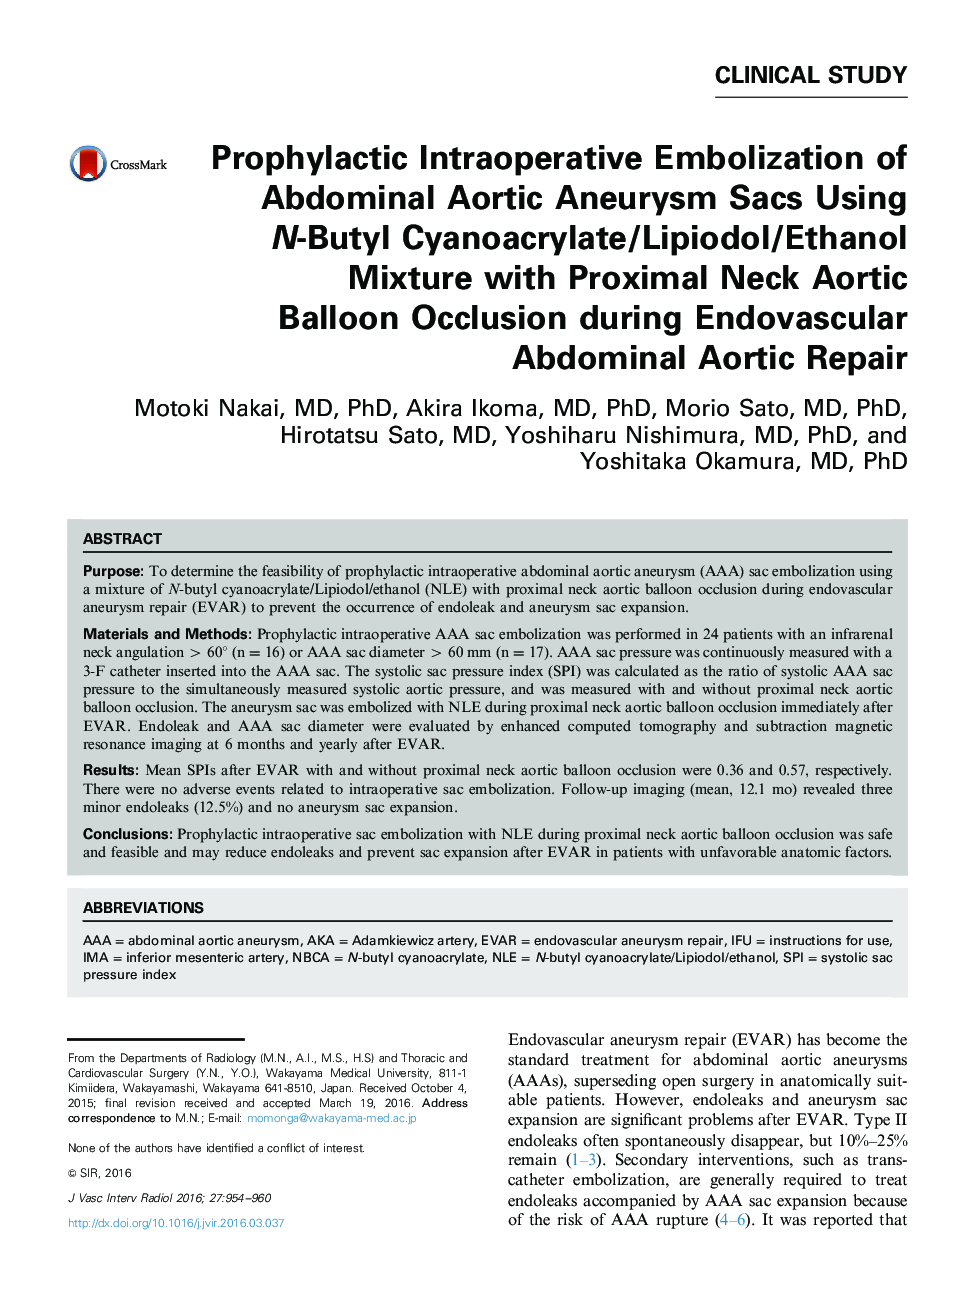 Prophylactic Intraoperative Embolization of Abdominal Aortic Aneurysm Sacs Using N-Butyl Cyanoacrylate/Lipiodol/Ethanol Mixture with Proximal Neck Aortic Balloon Occlusion during Endovascular Abdominal Aortic Repair